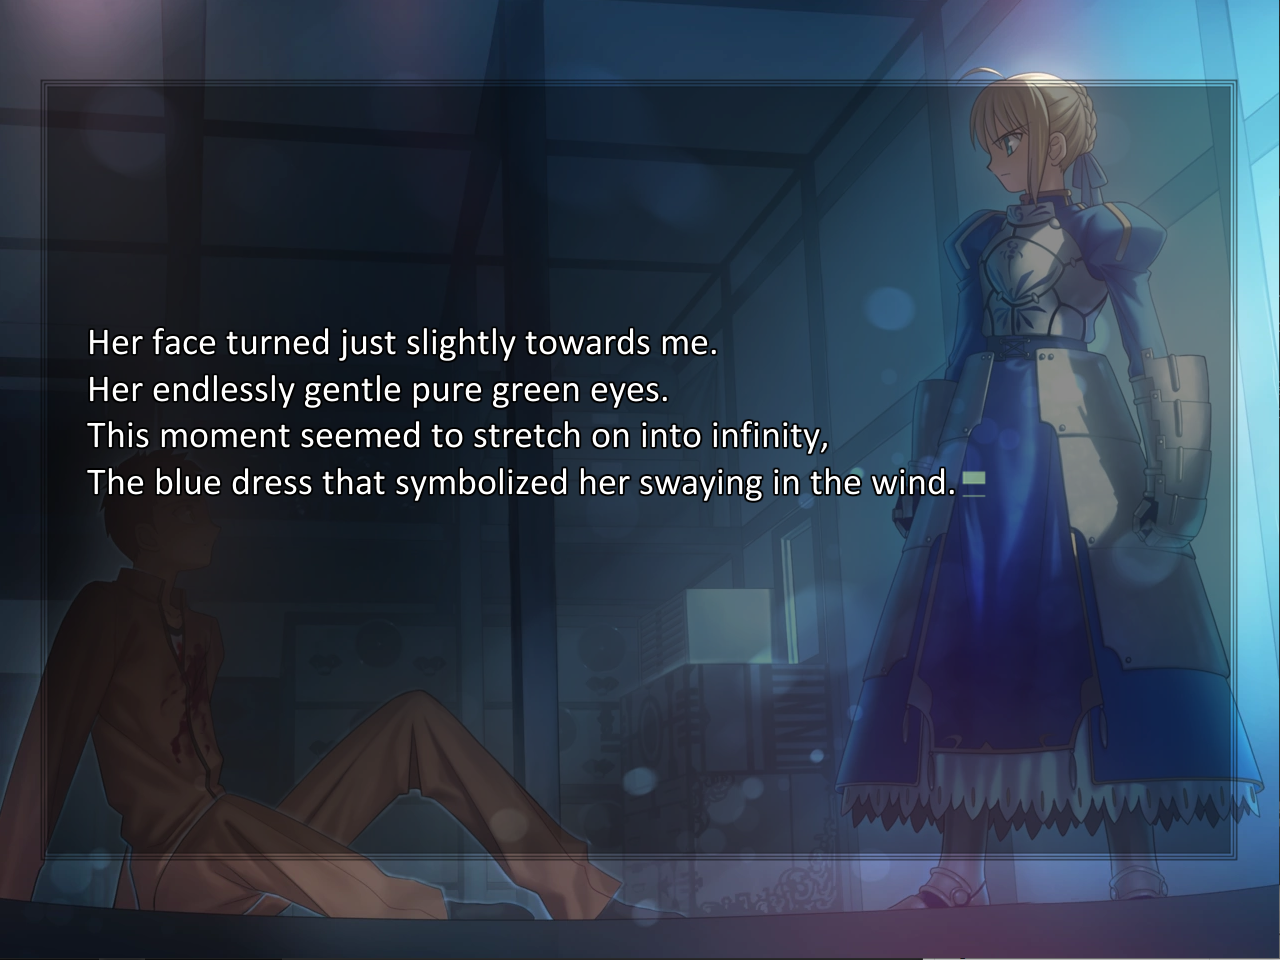 Re-translating Fate/stay night. Almost two years ago today, I